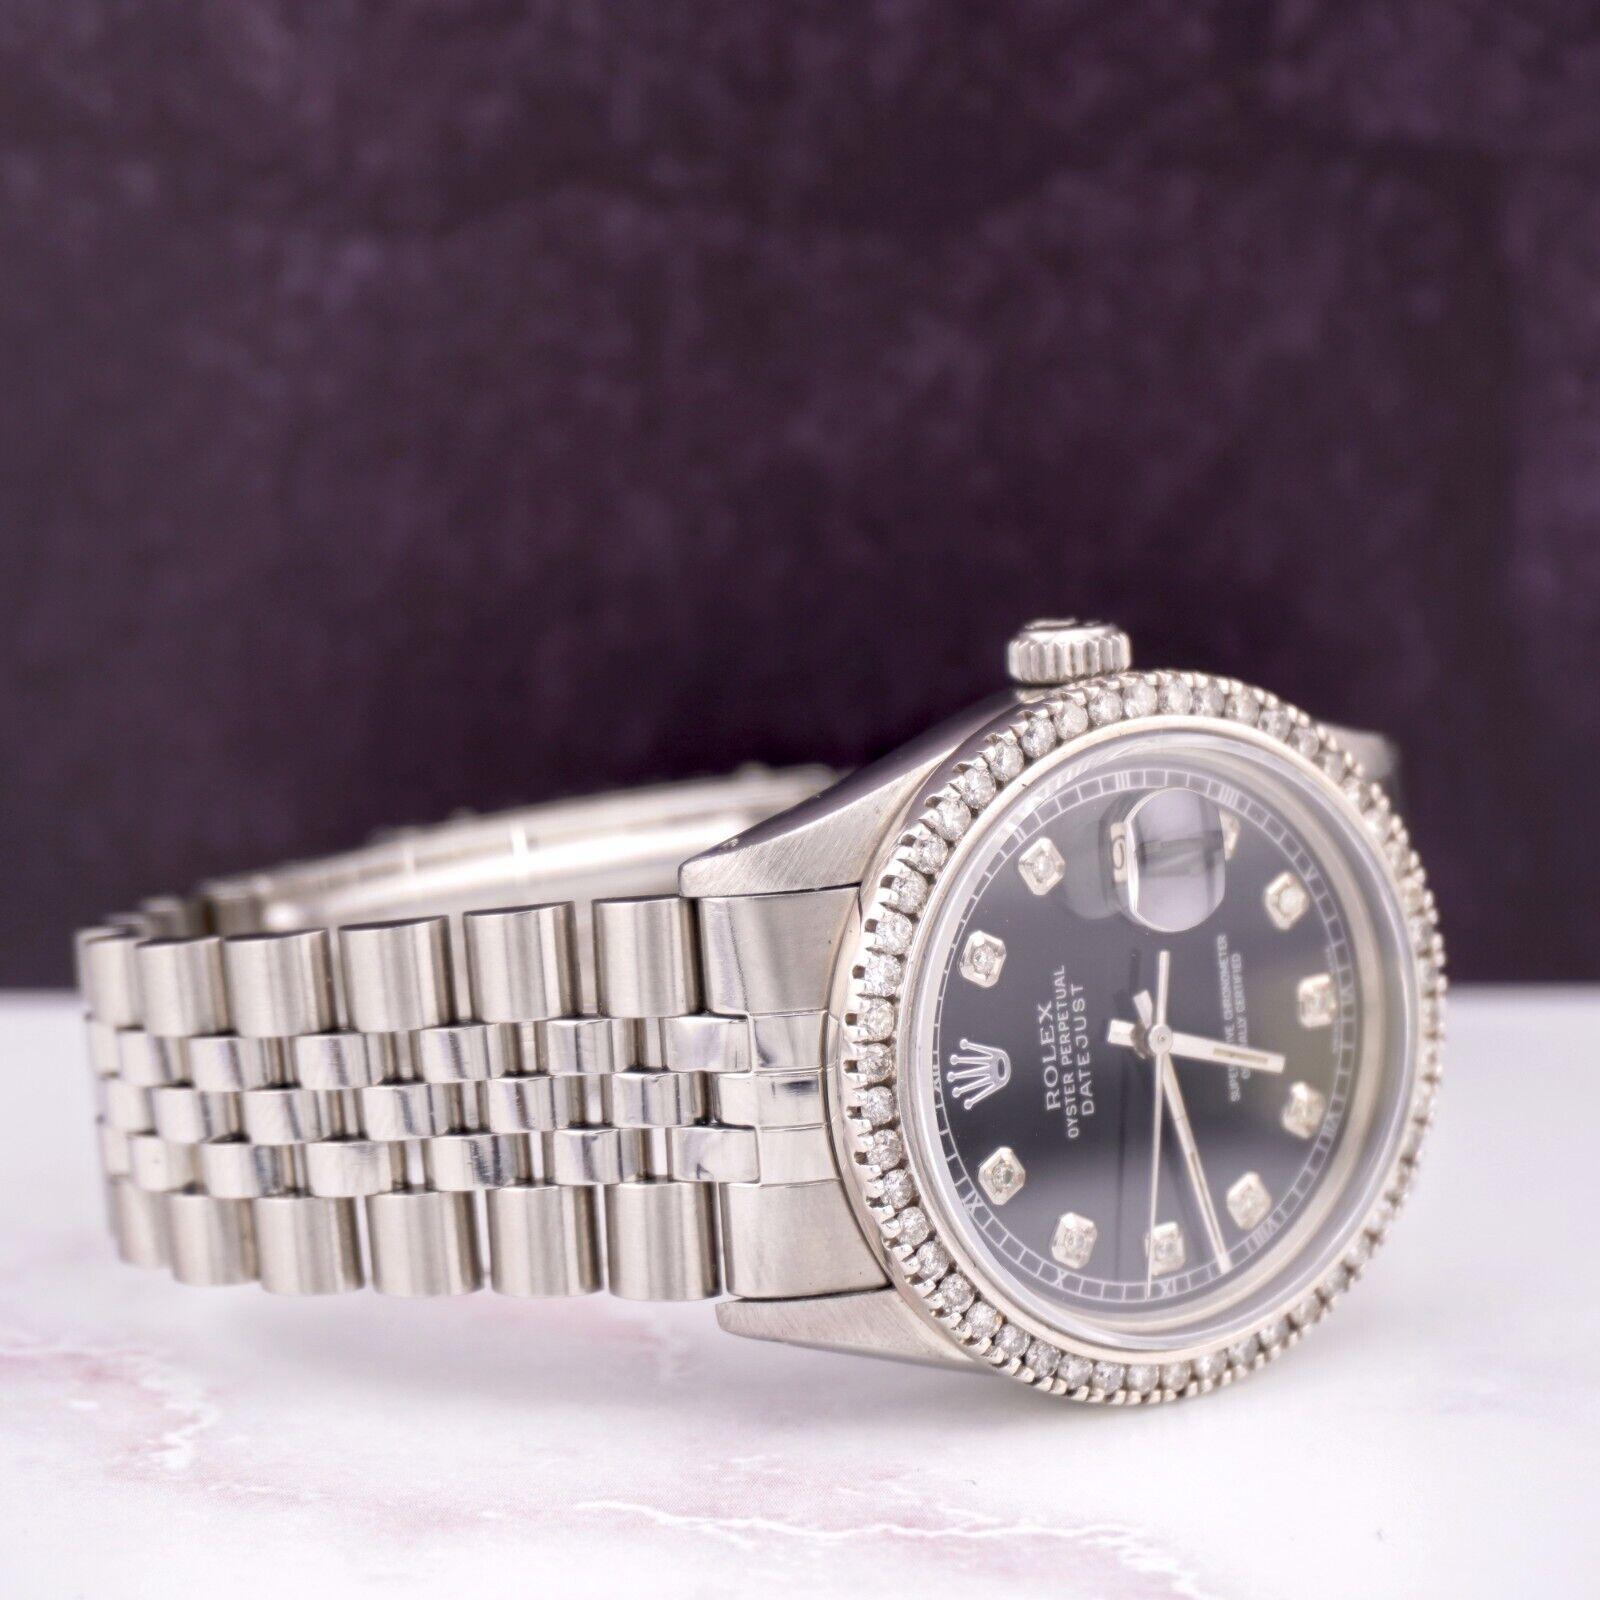 Rolex Datejust 36mm Watch. A Pre-owned watch w/ Gift Box. Watch is 100% Authentic and Comes with Authenticity Card. Watch Reference is 16014 and is in Excellent Condition (See Pictures). The dial color is Black and material is Stainless Steel. 2.5ct